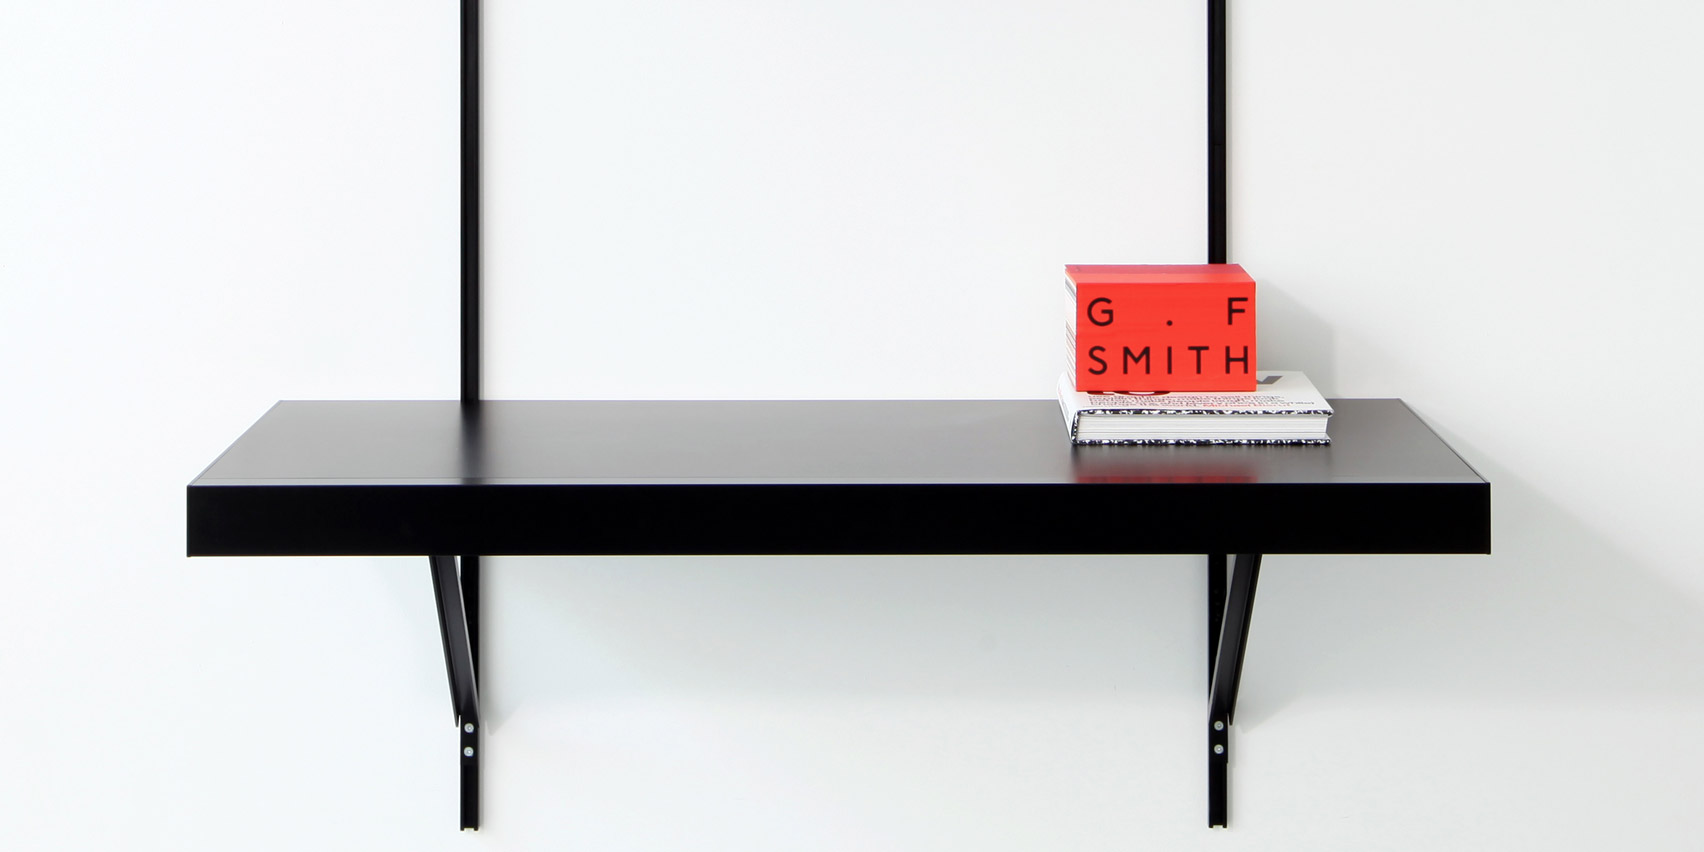 ON&ON's shelving system with a desk unit